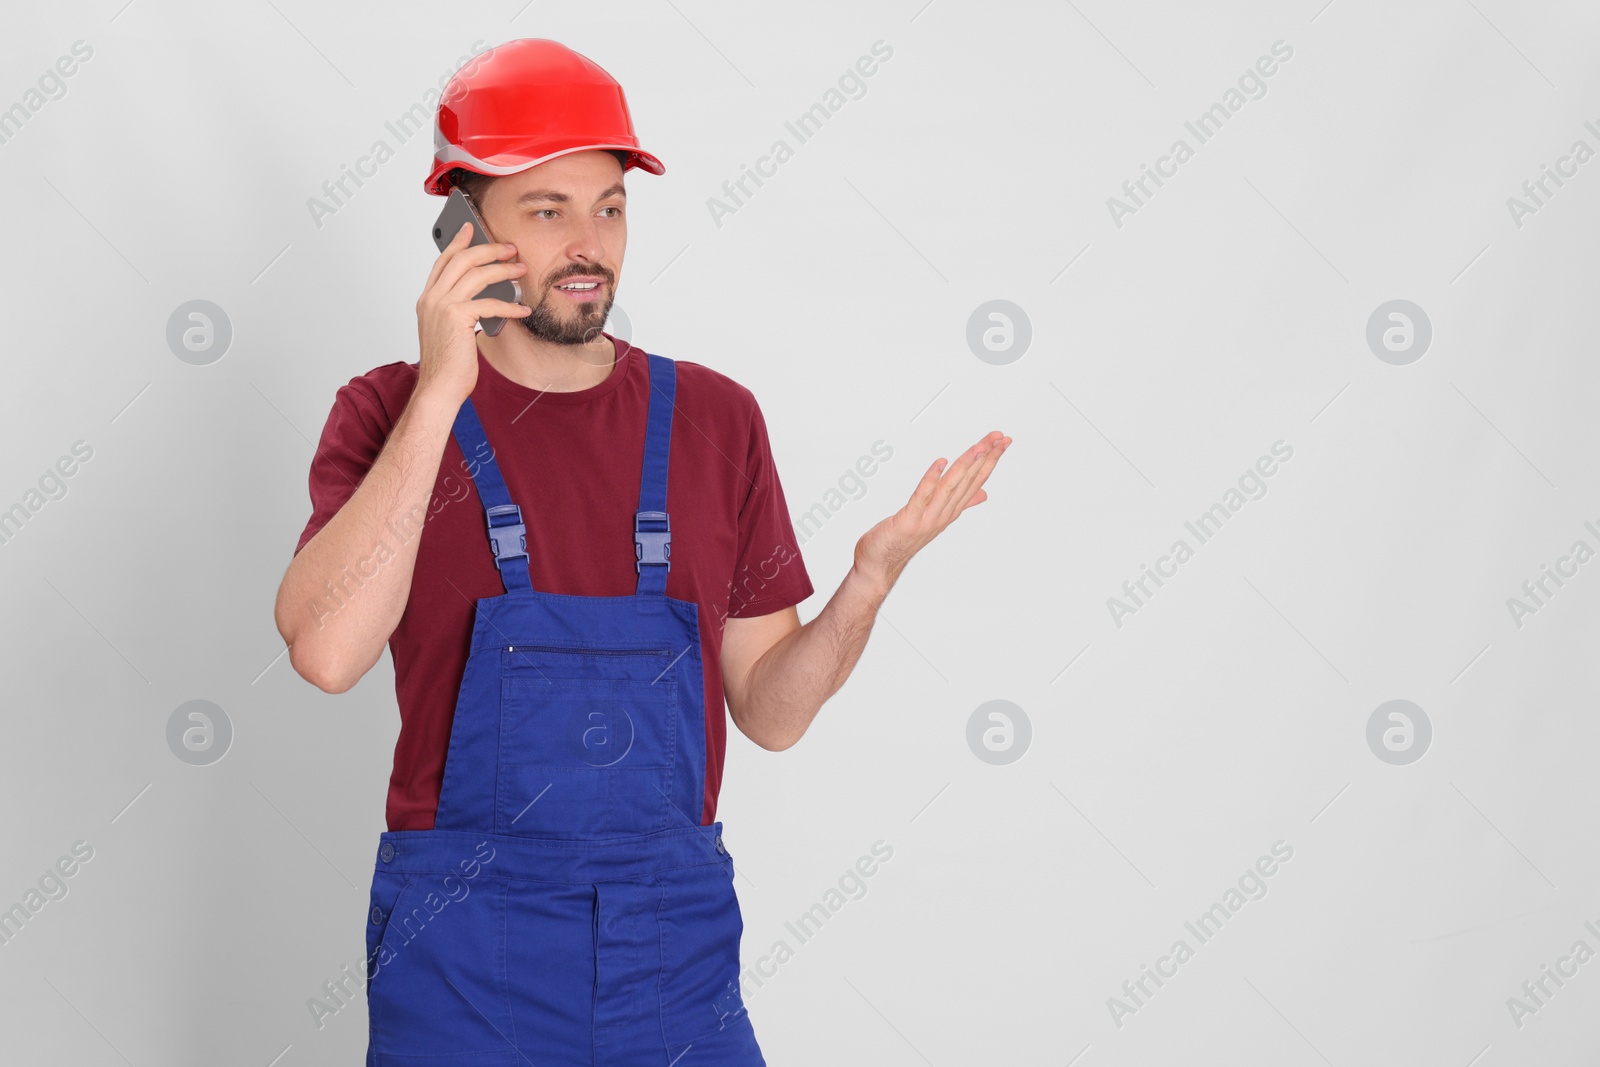 Photo of Professional repairman in uniform talking on phone against white background, space for text